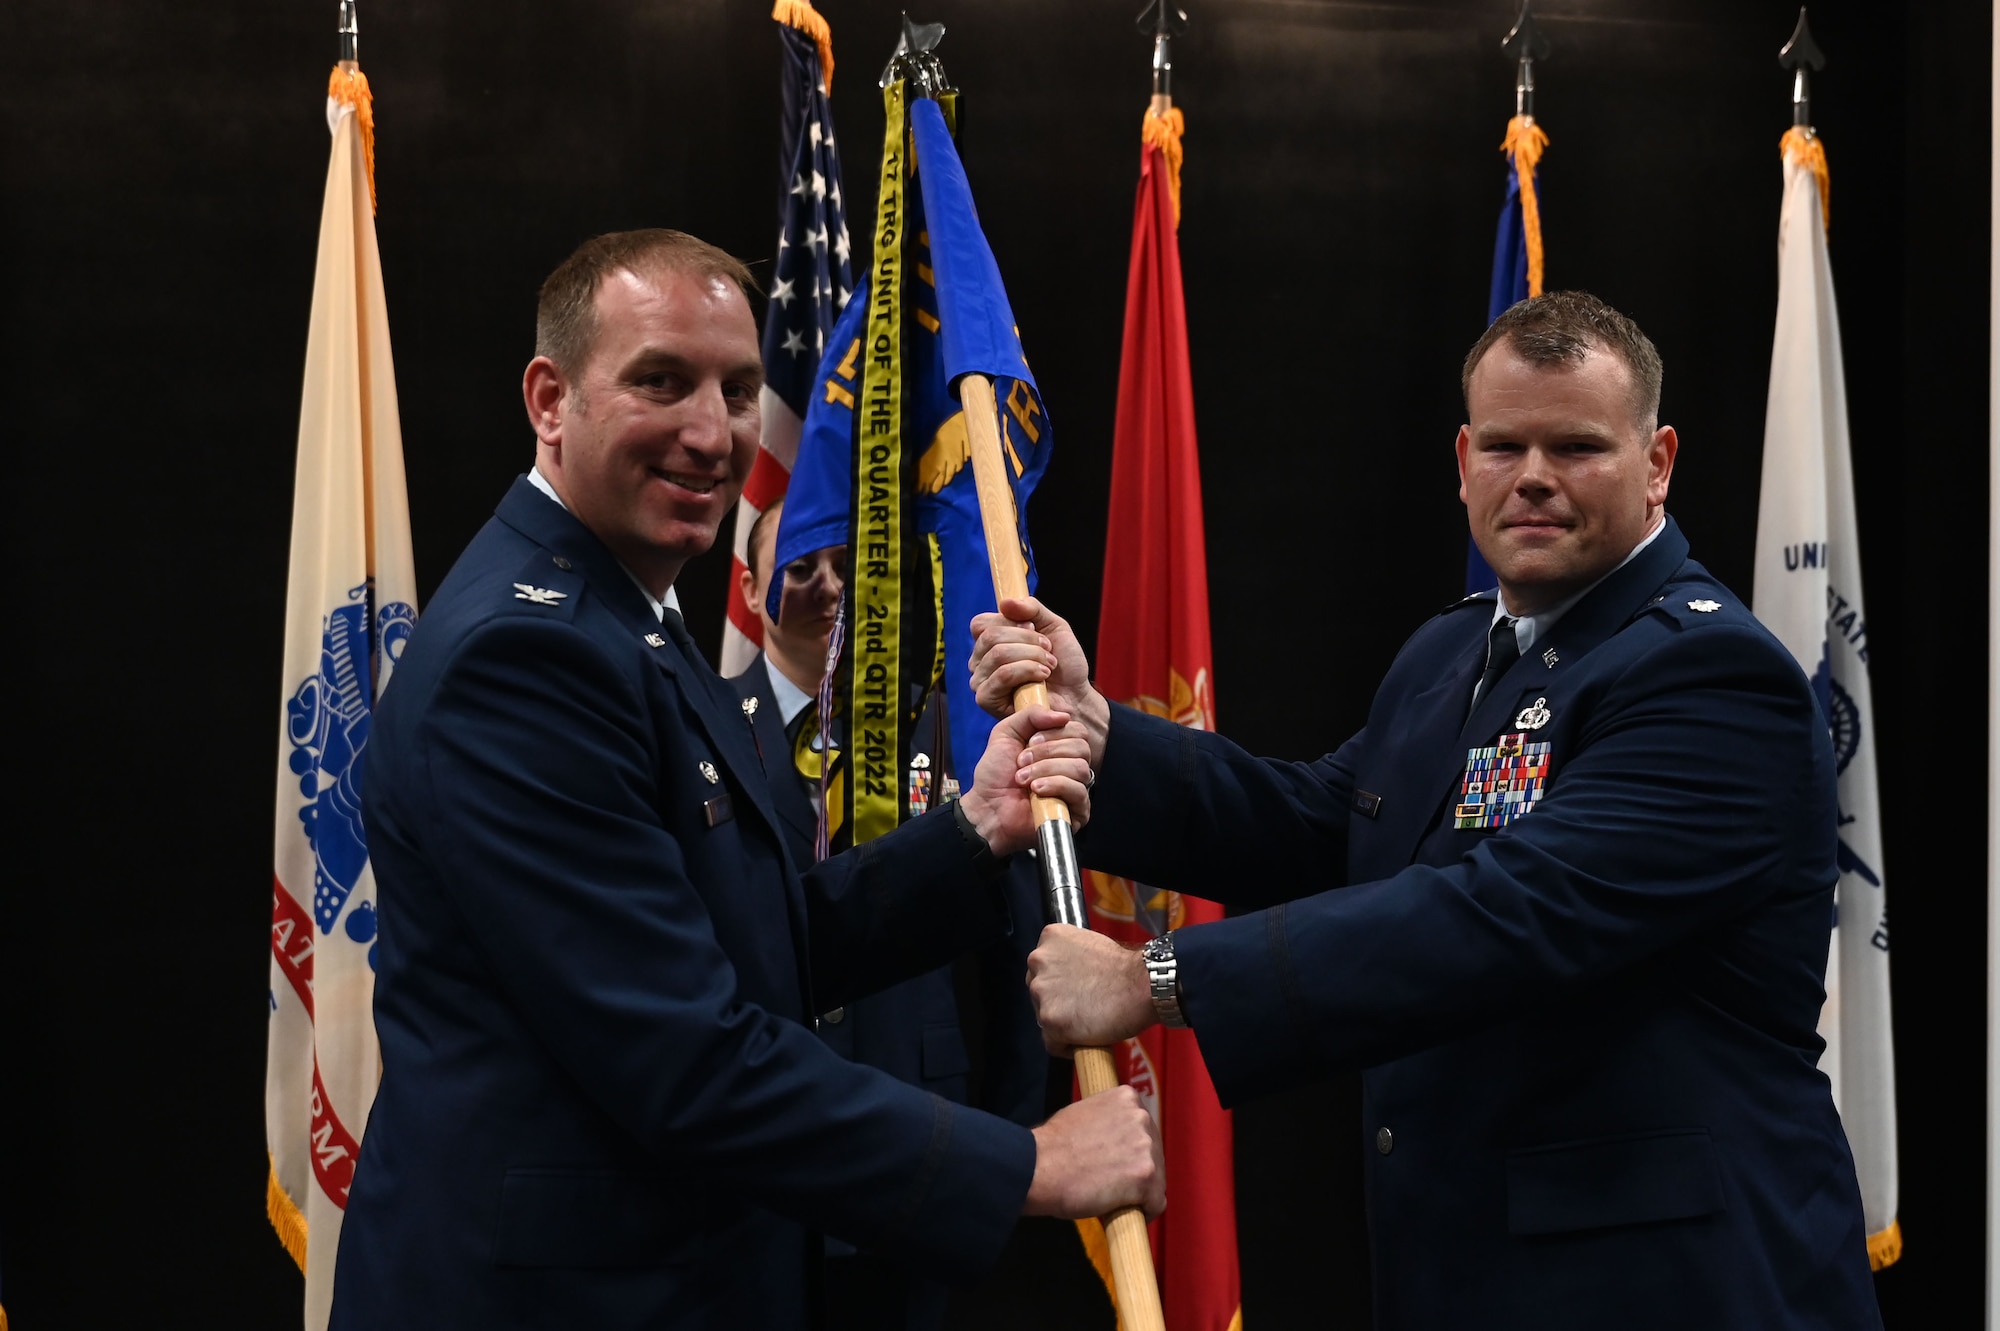 U.S. Air Force Col. Jason Kulchar, 17th Training Group commander, passes the guidon to Lt. Col. Garrett Williams, incoming 313th Training Squadron commander, during the change of command ceremony at the Powell Event Center, Goodfellow Air Force Base, Texas, June 9, 2023. Williams was formerly responsible for daily staff operations and integrating 16th Air Force operations, activities, and investments into the efforts of the United States Cyber Command, the National Security Agency, and other interagency and international partners. (U.S. Air Force photo by Airman 1st Class Madison Collier)